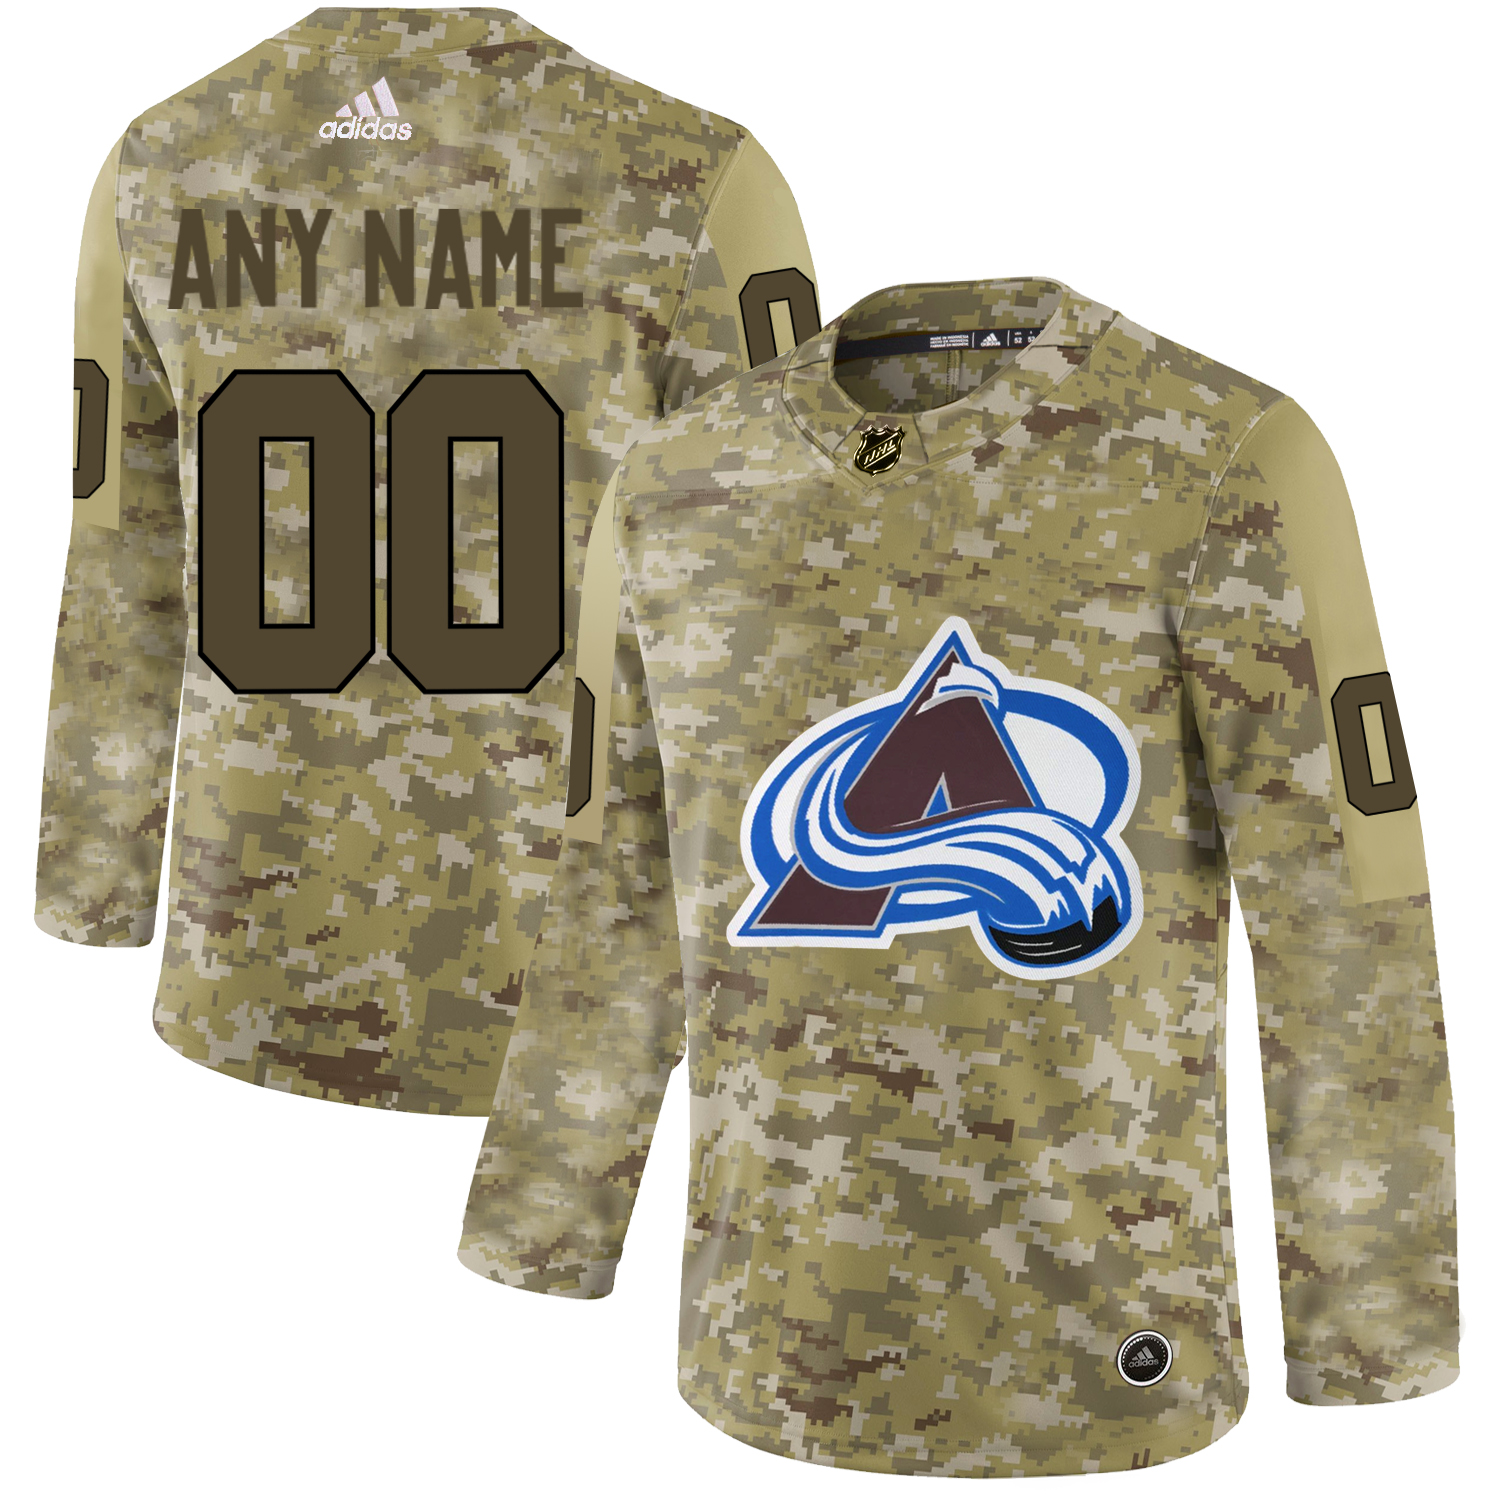 Men's Adidas Avalanche Personalized Camo Authentic NHL Jersey